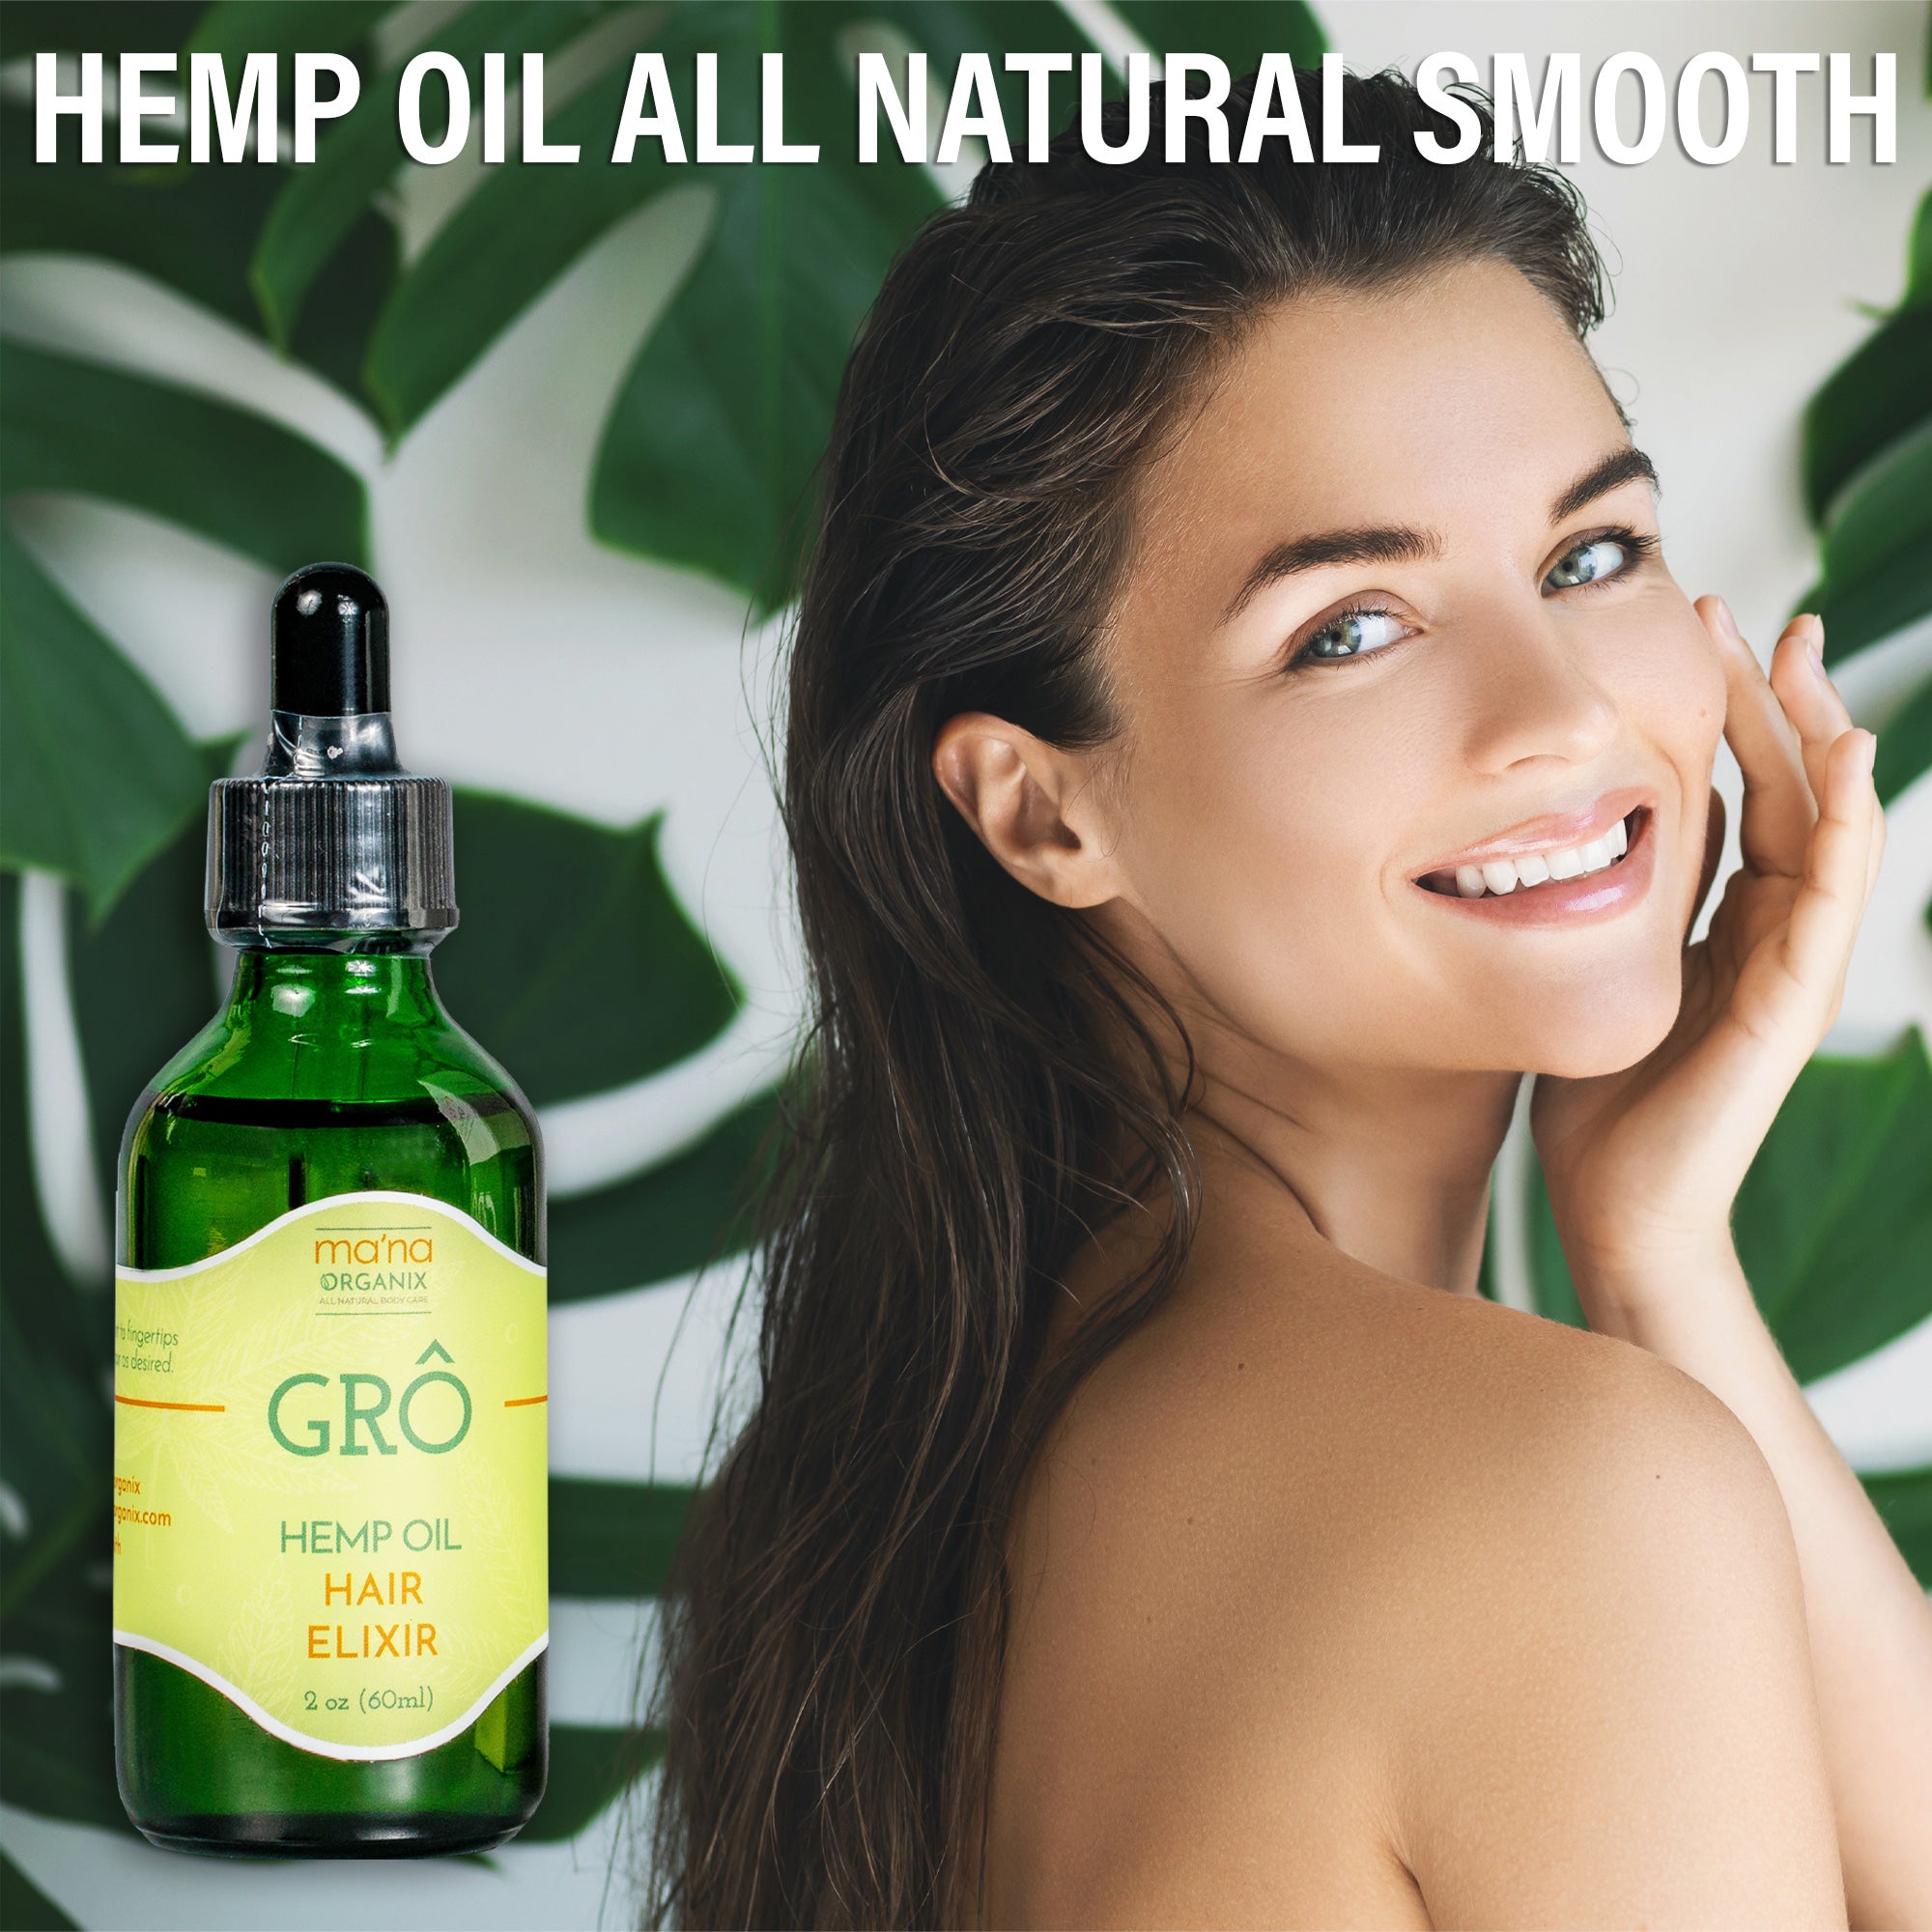 All Natural GRO Hemp Oil Hair Elixir with Vegan and Cruelty-Free Ingredients Only (2 oz. Bottle)